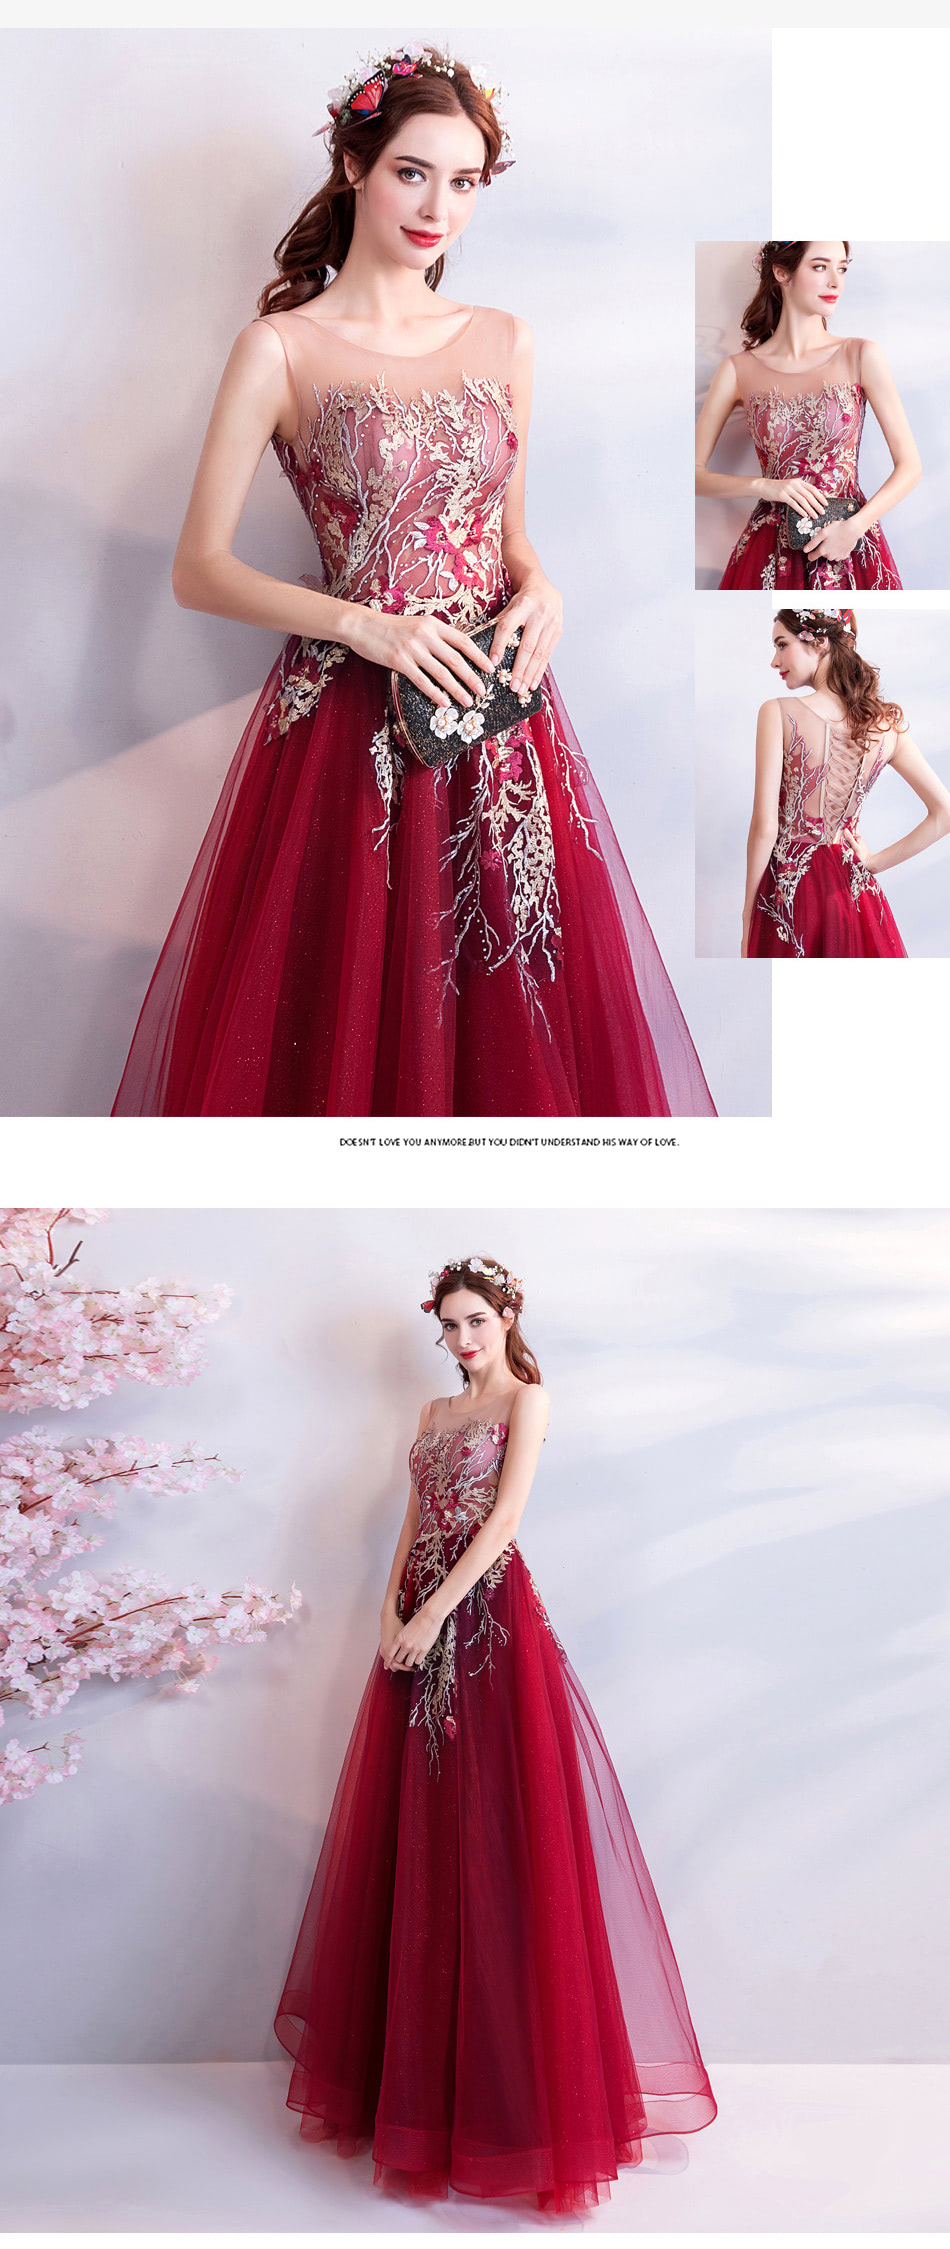 Gorgeous-Red-Couture-Dress-for-Wedding-Party-Prom-All-Occasions12.jpg